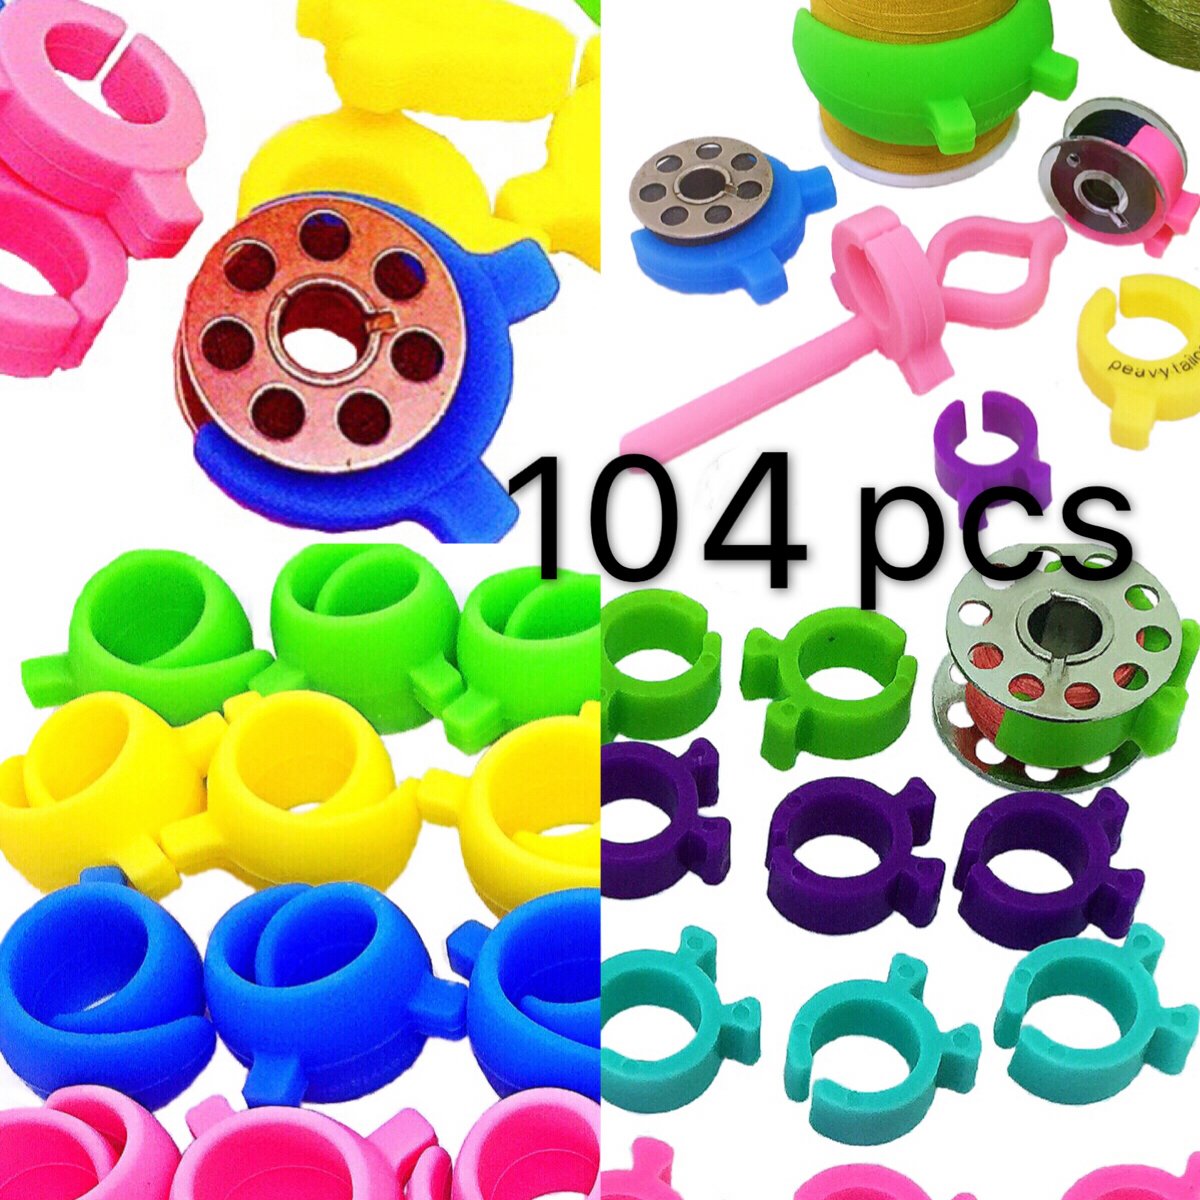 Quilting and Sewing Thread PeavyTailor 14 Pcs Bobbin Holders Clamp Great for Embroidery